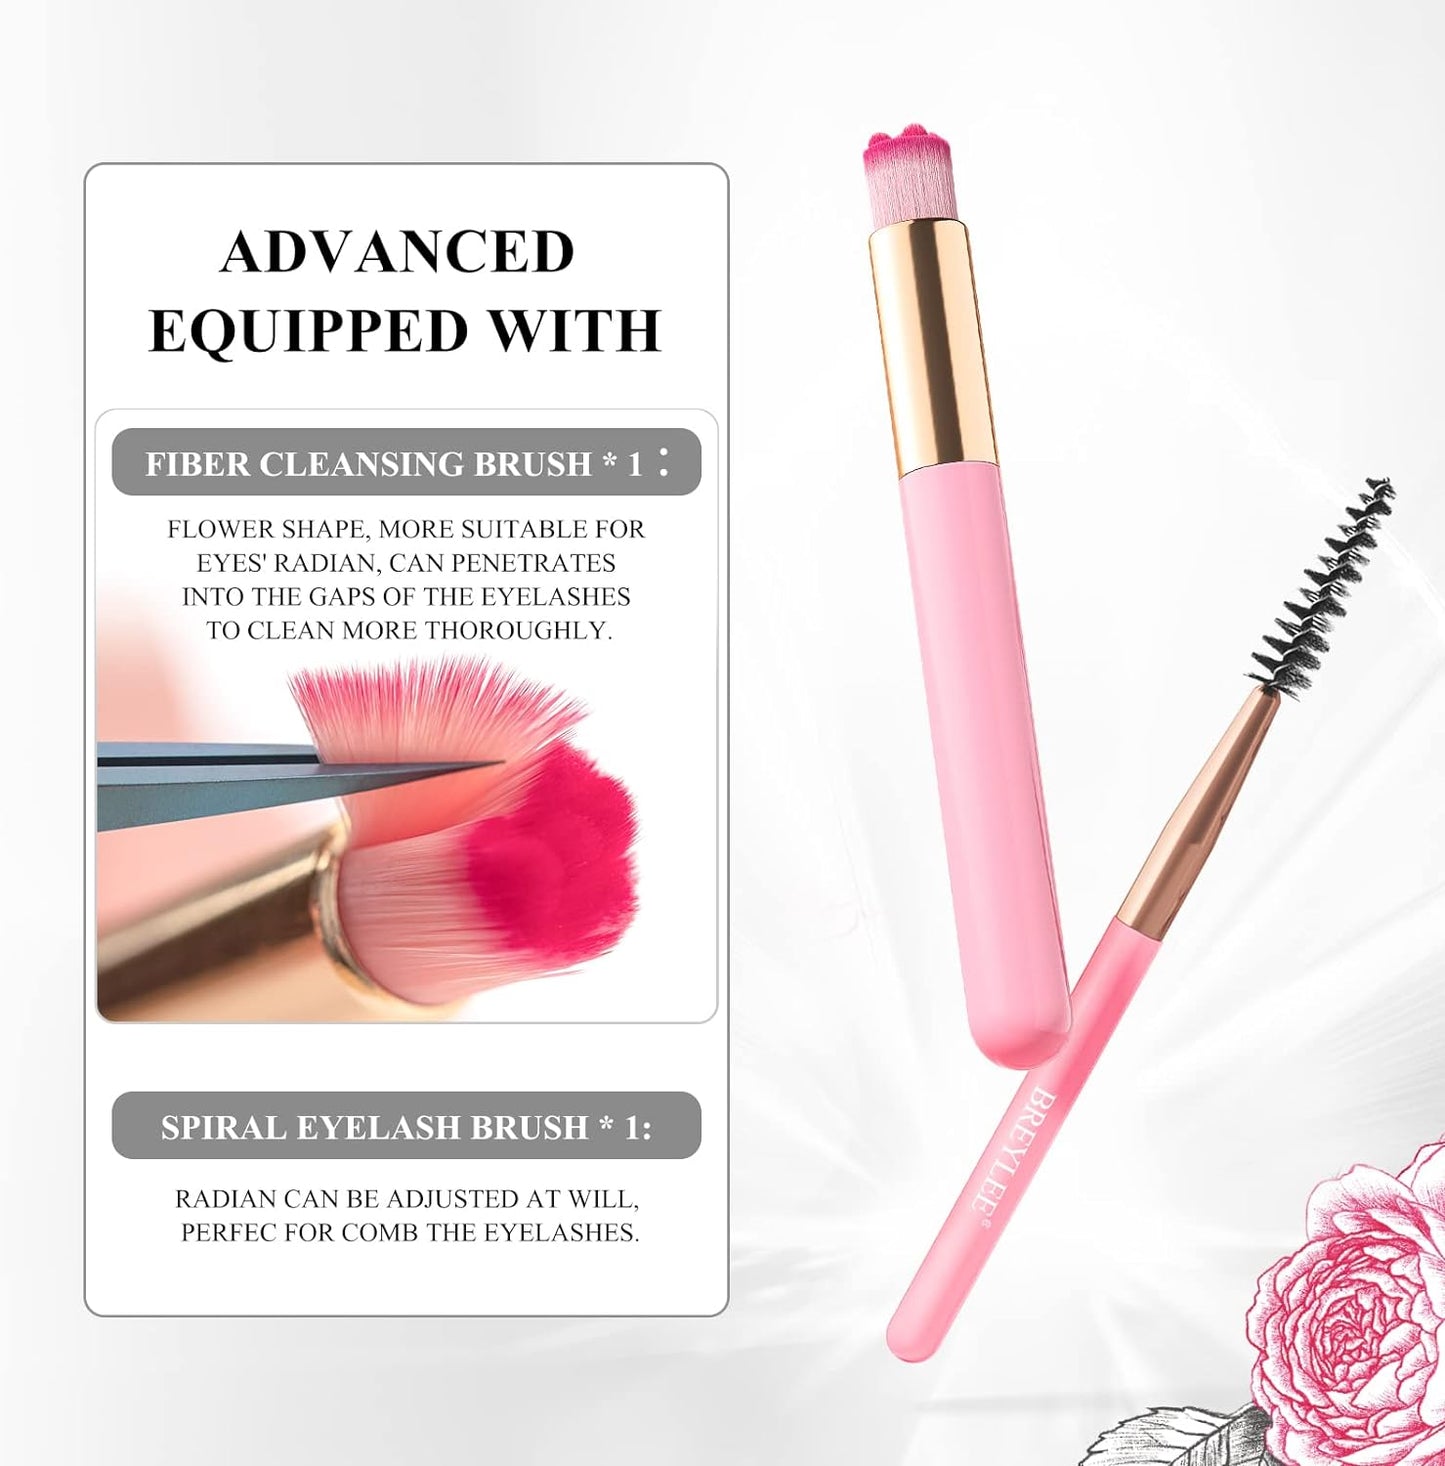 Lash cleansing tool and brush duo